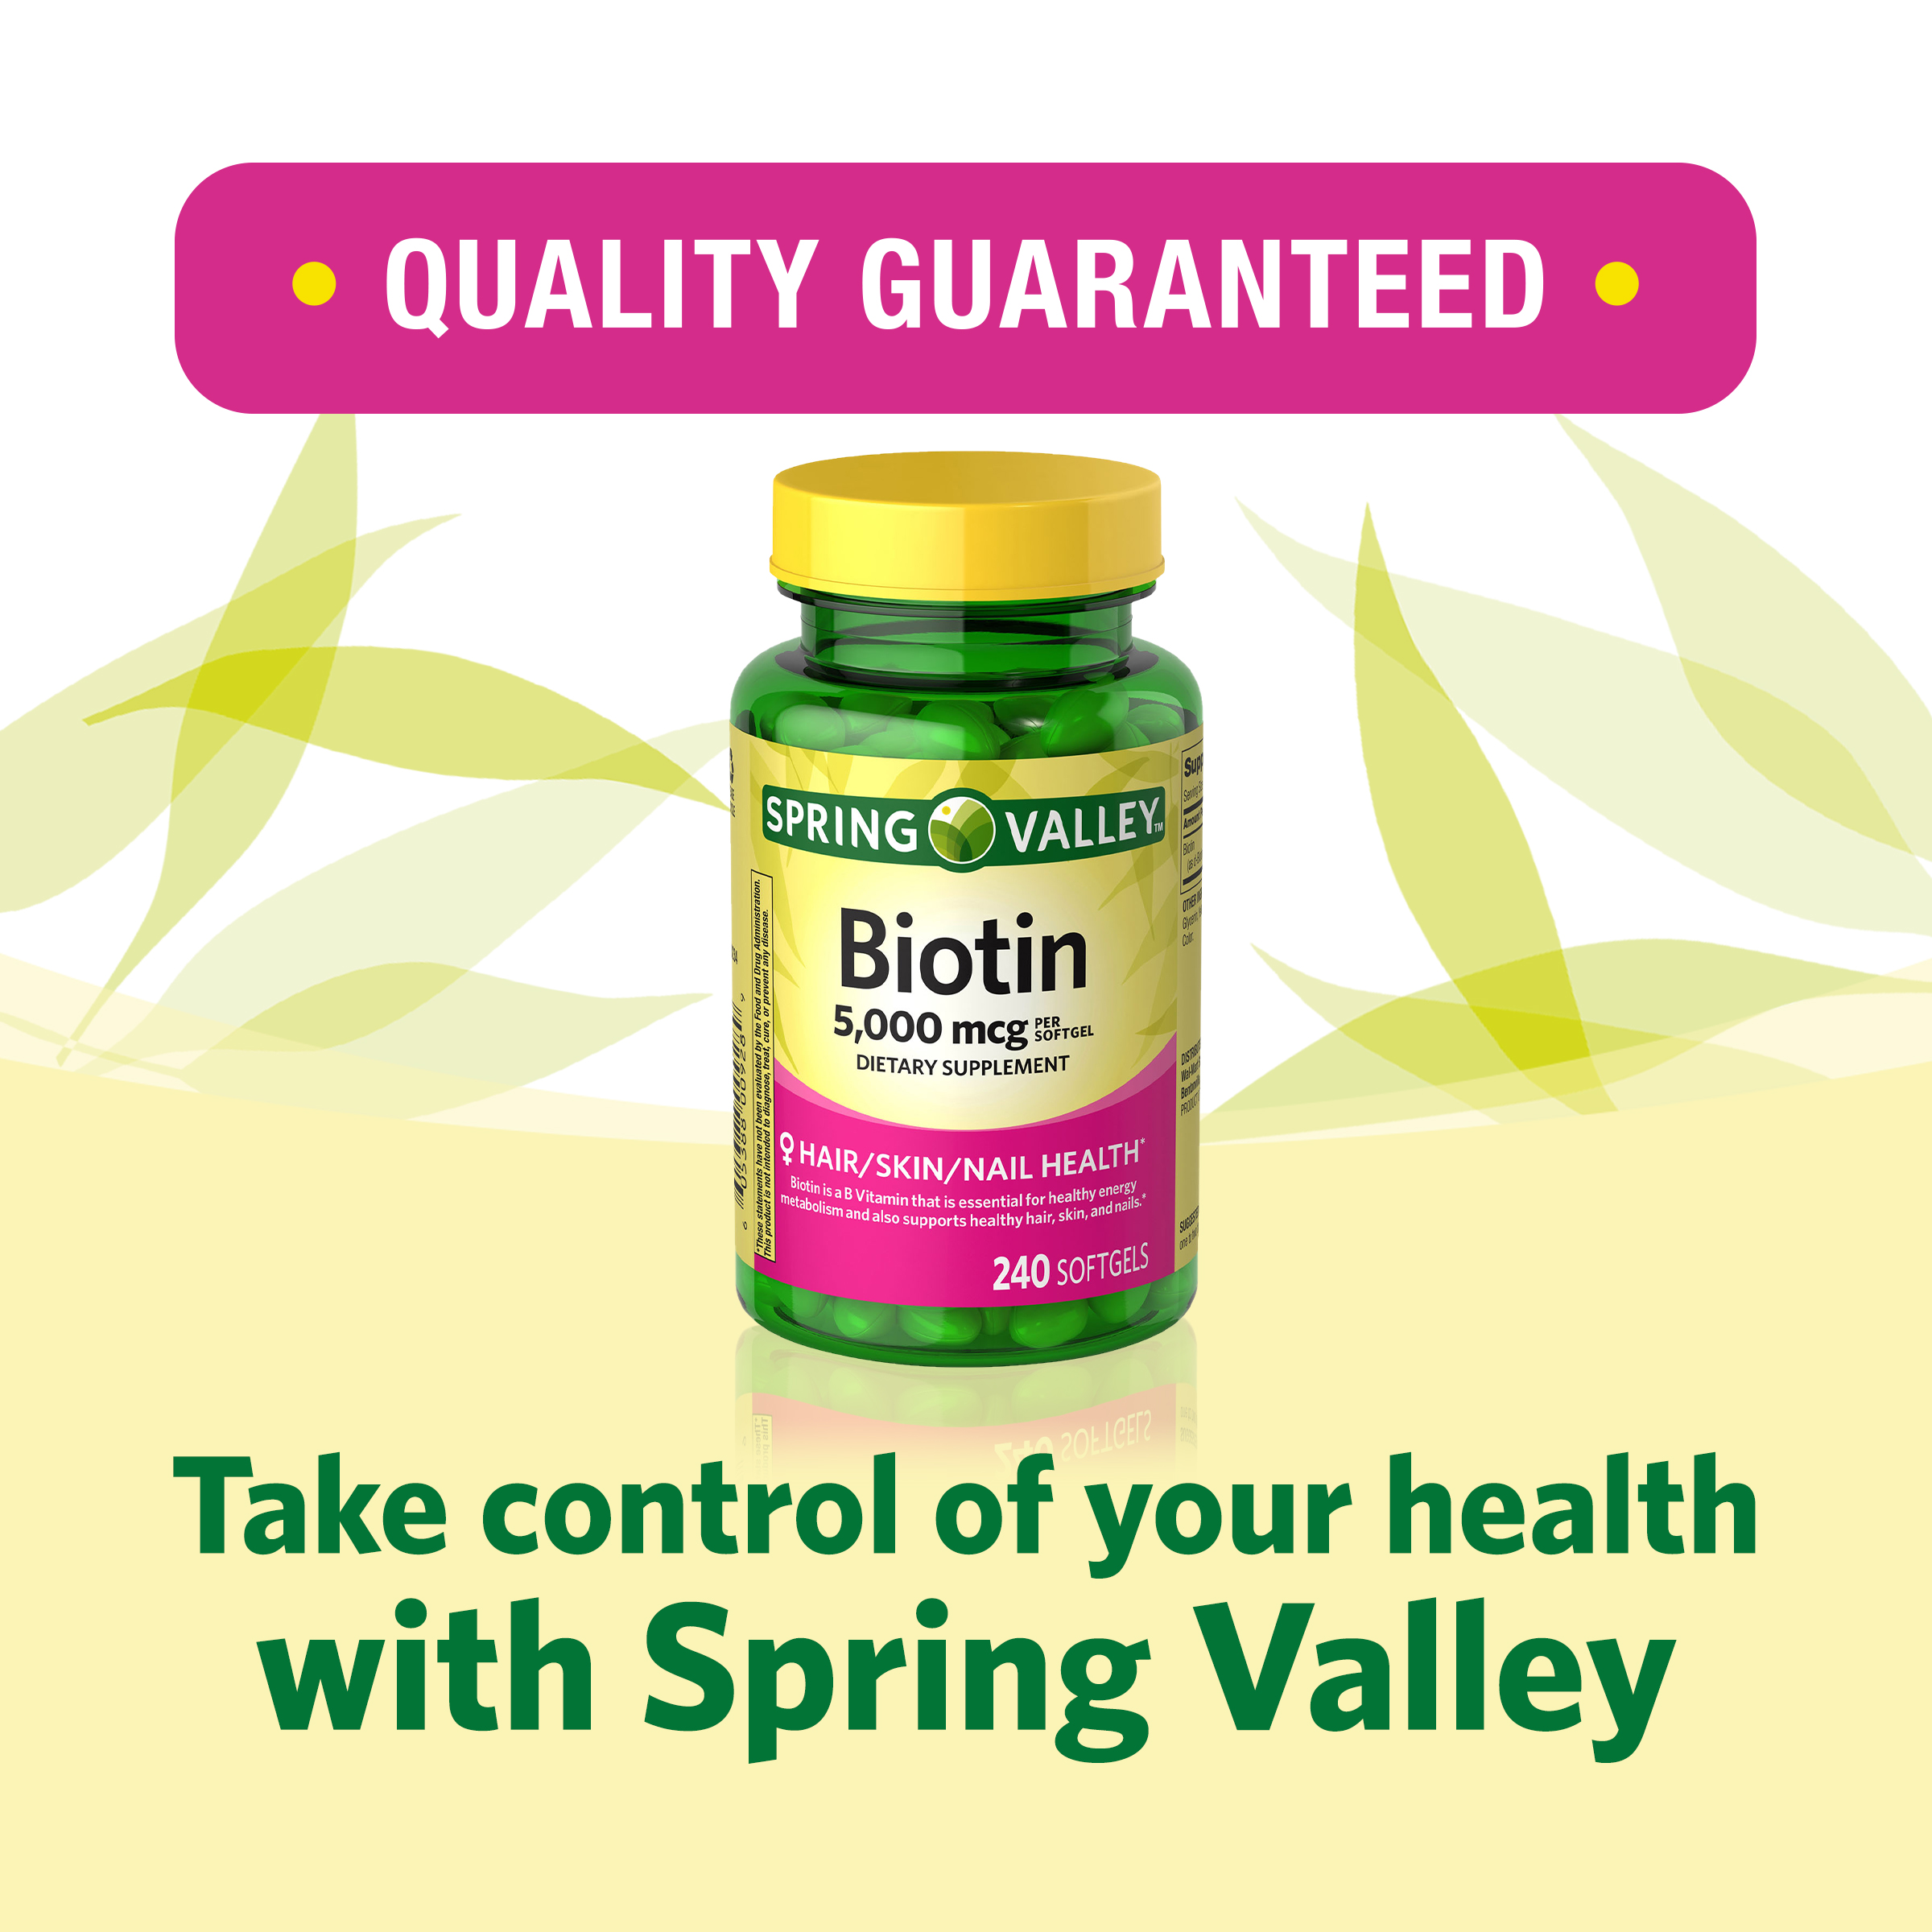 Spring Valley Biotin Softgels Dietary Supplement, 5,000 mcg, 240 Count - image 4 of 16